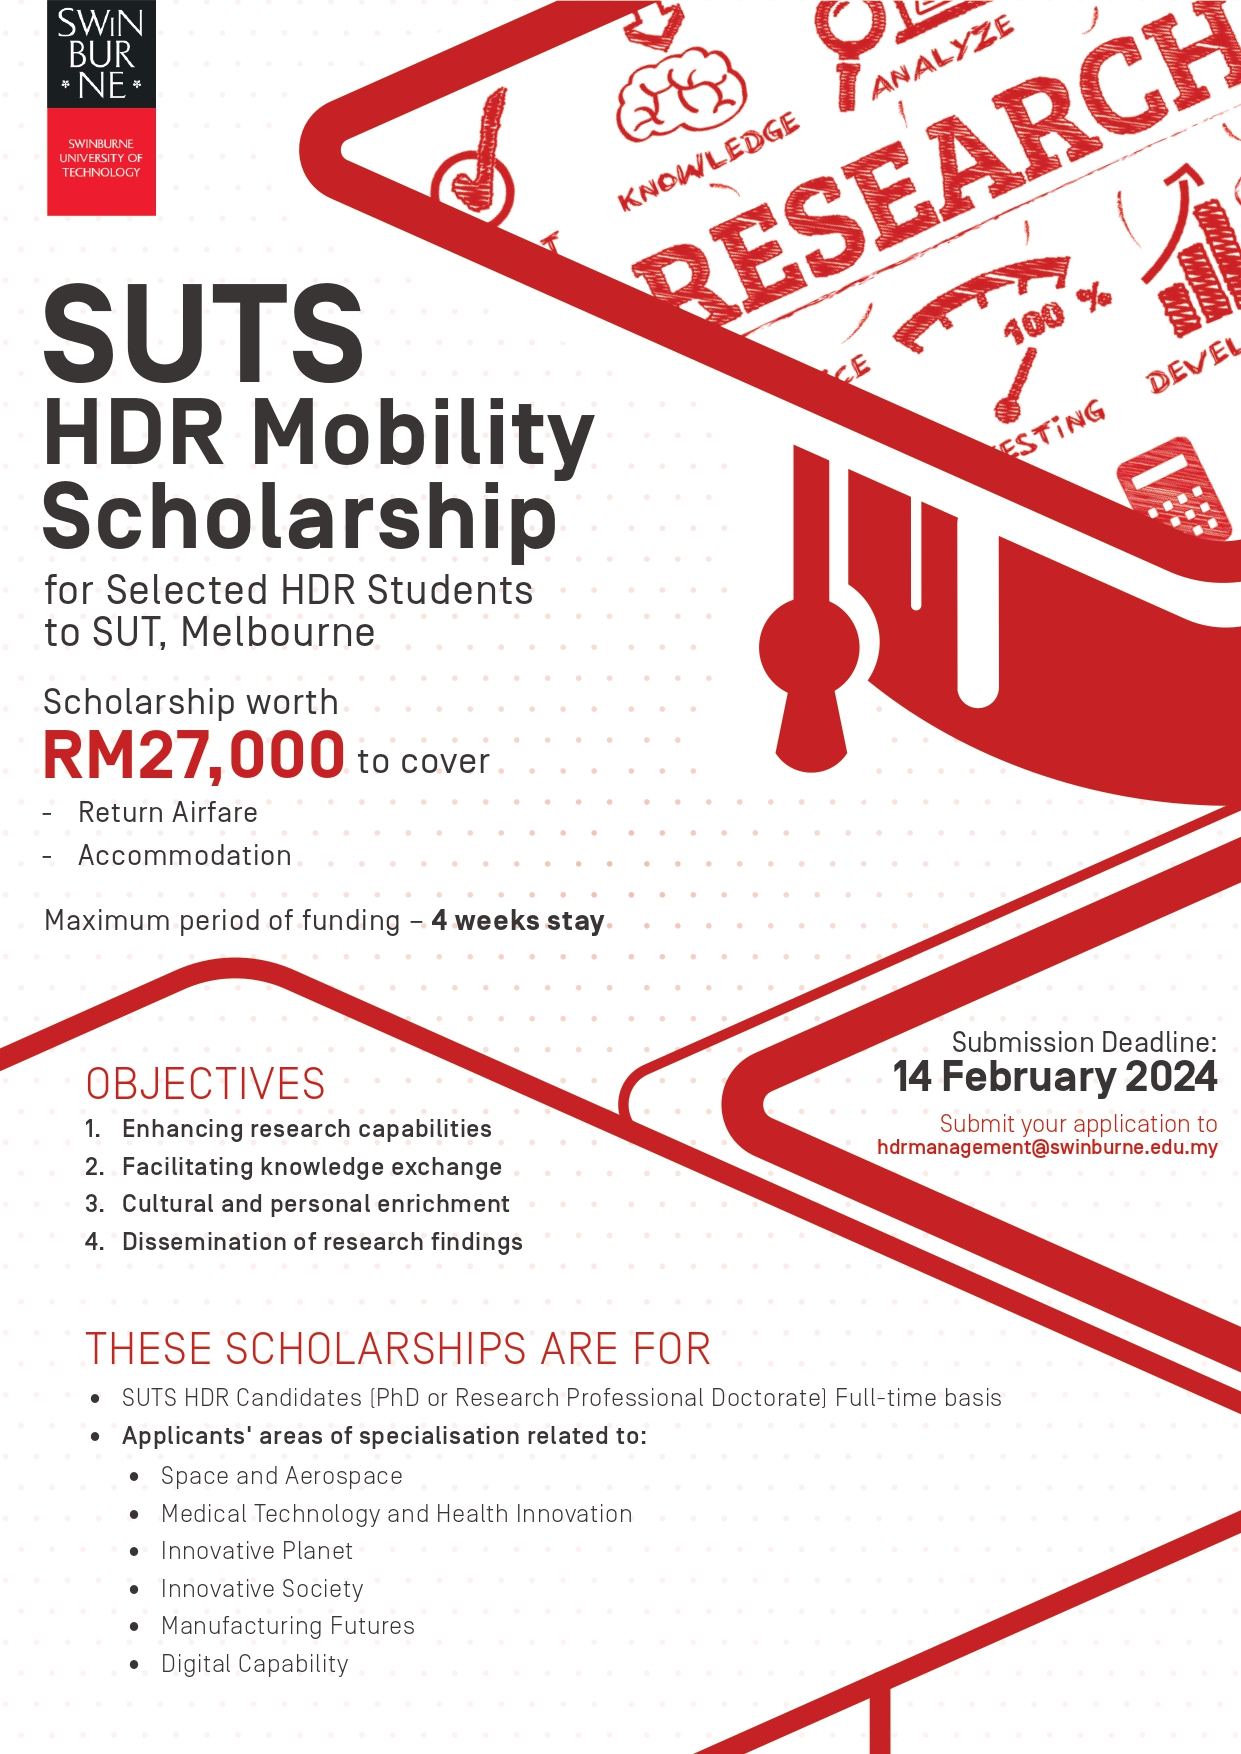 SUTS HDR Mobility Grant